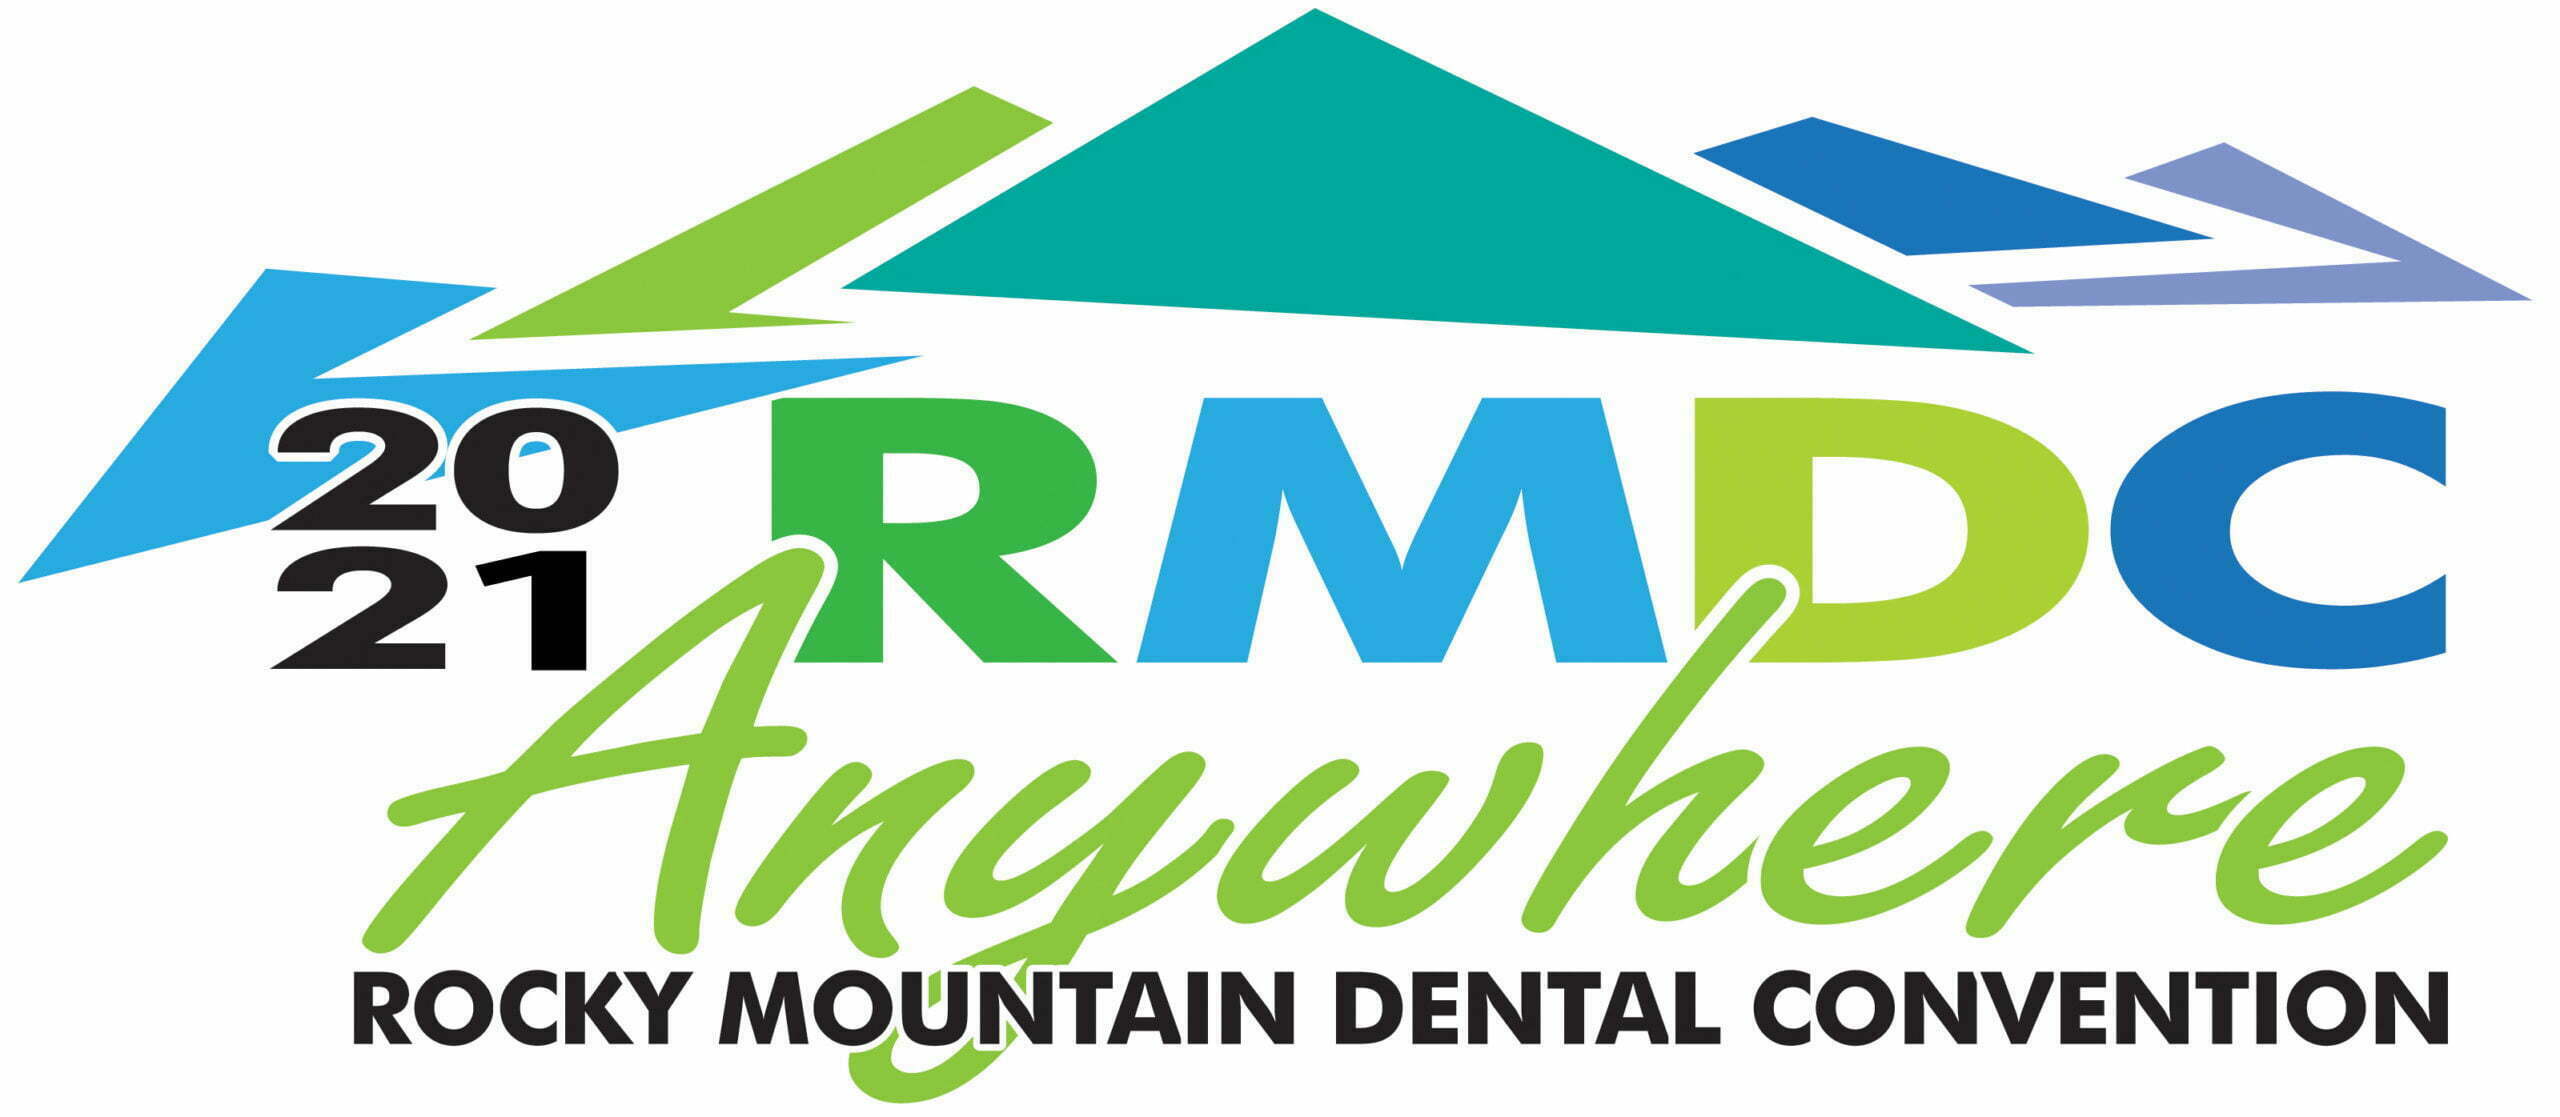 Rocky Mountain Dental Convention Mdds